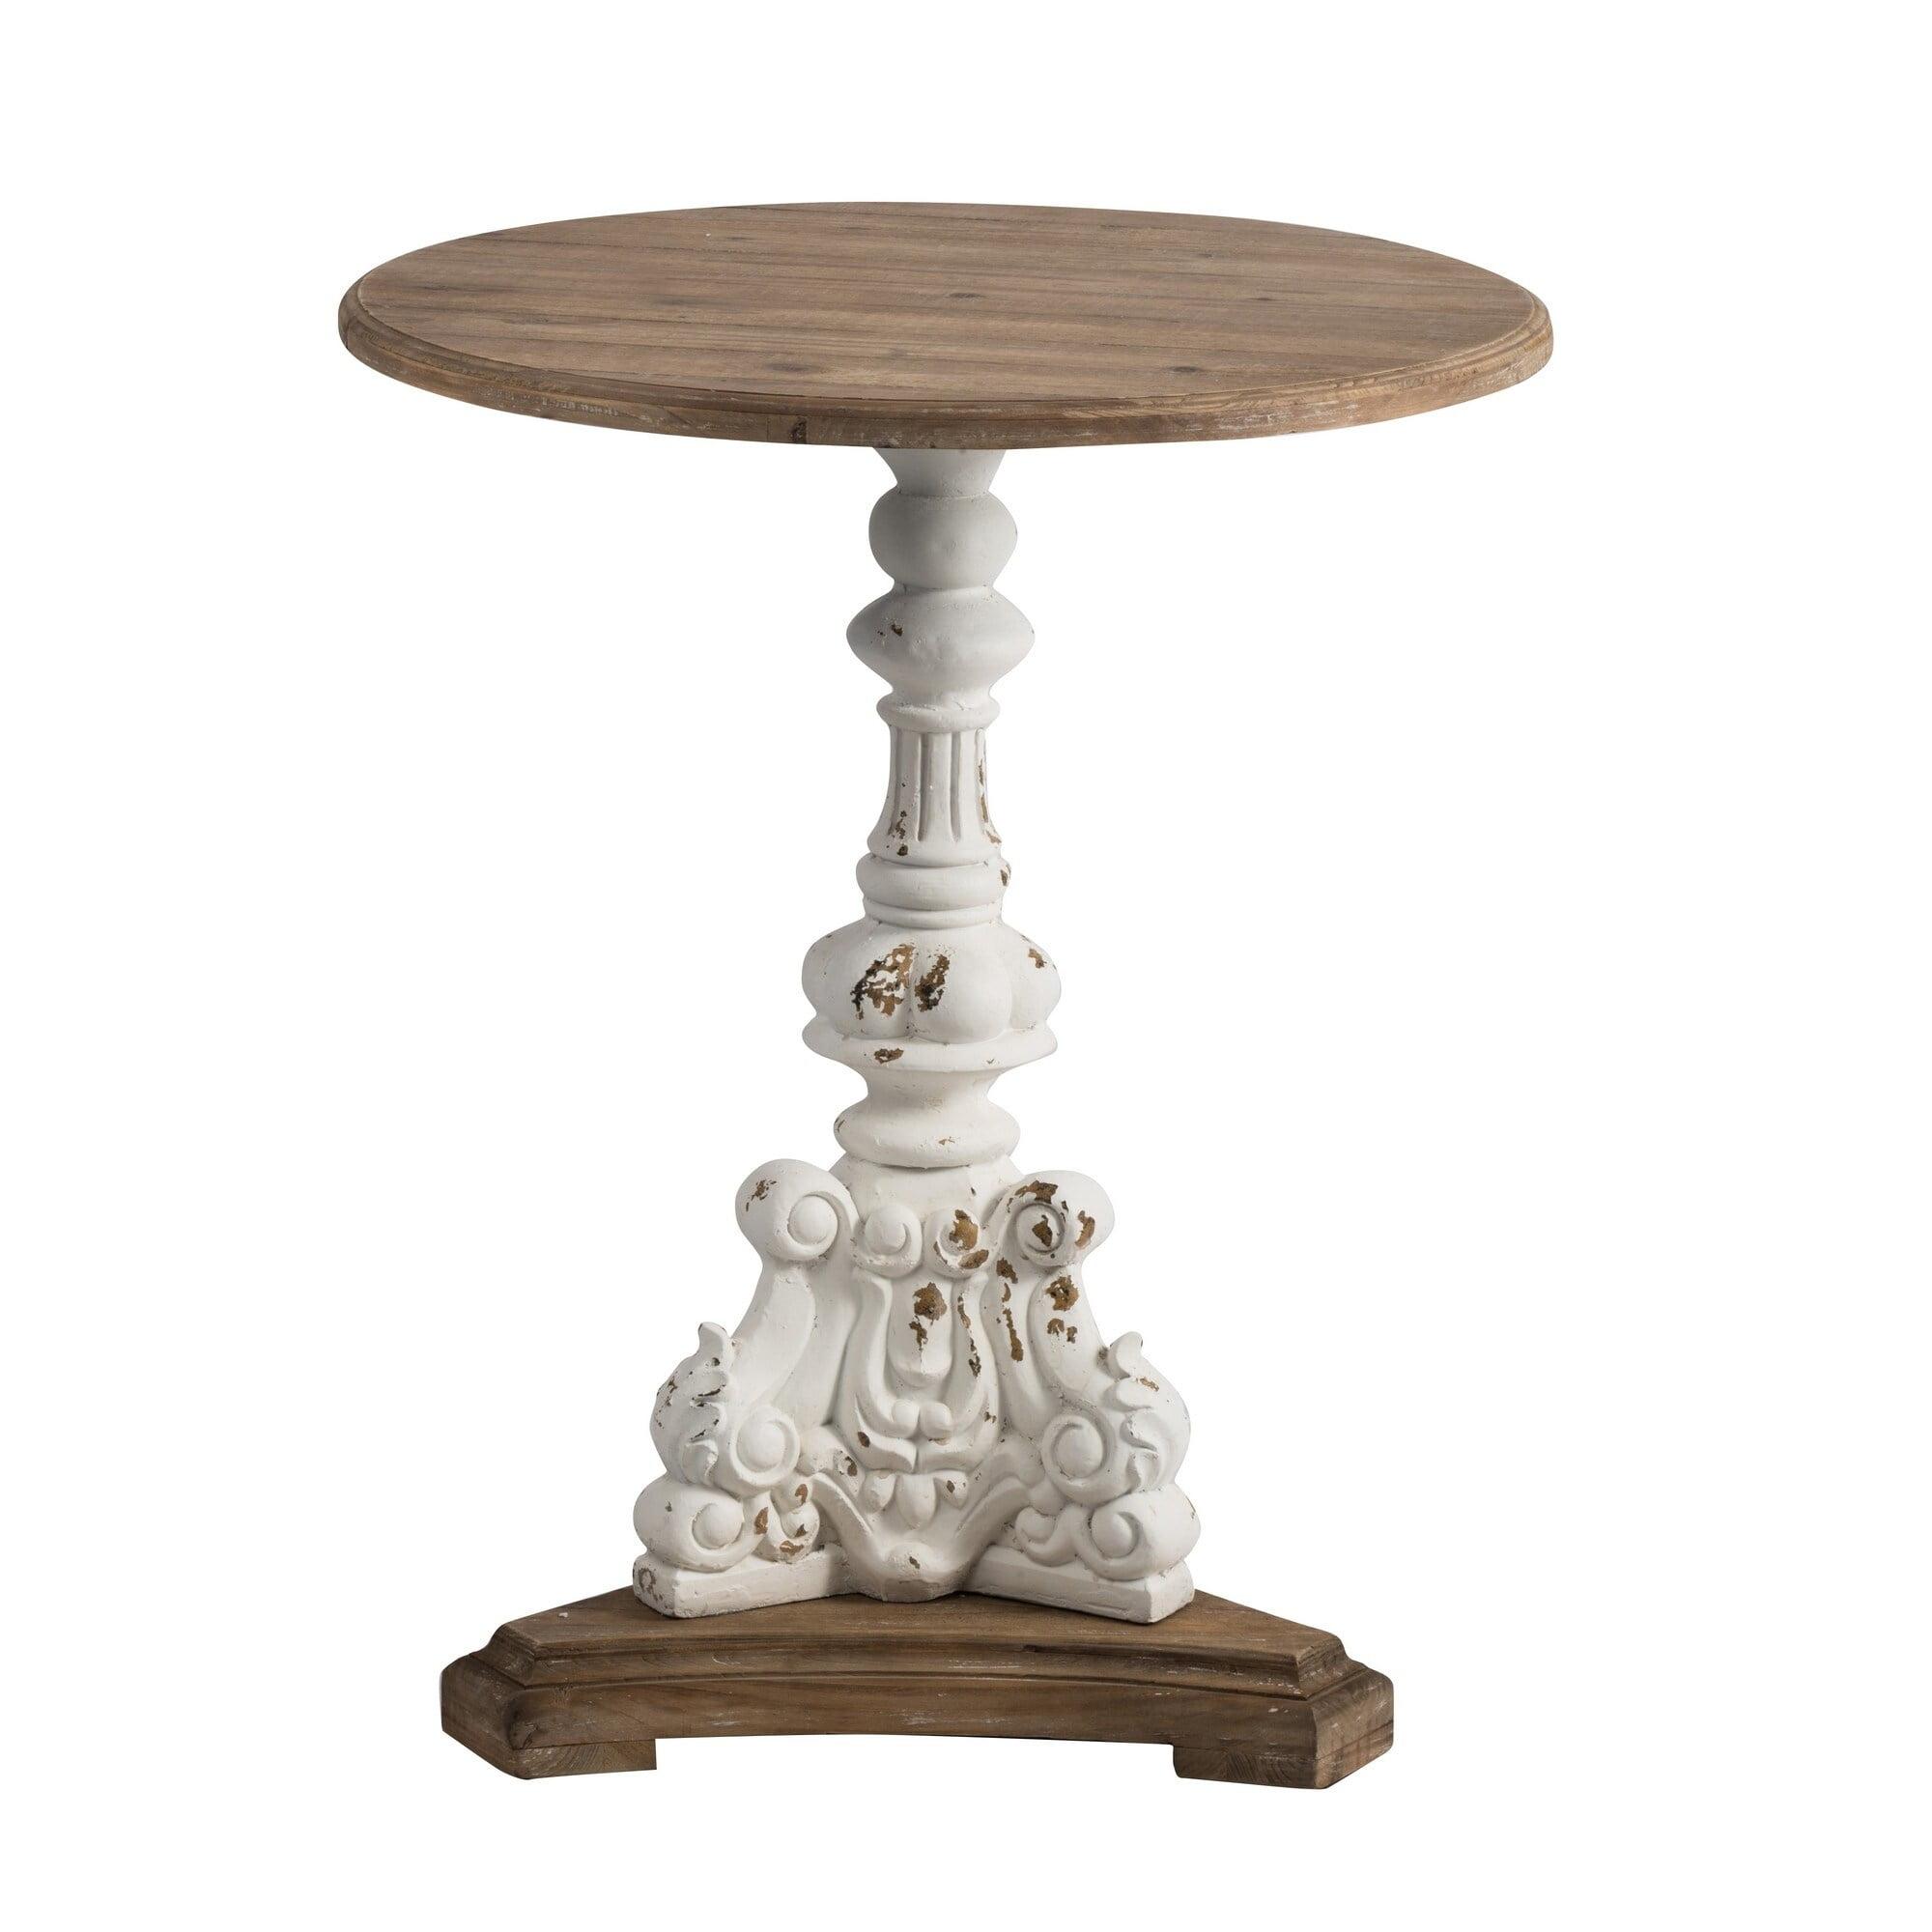 Prana Vintage-Inspired Round Accent Table in Dual Brown and White Finish